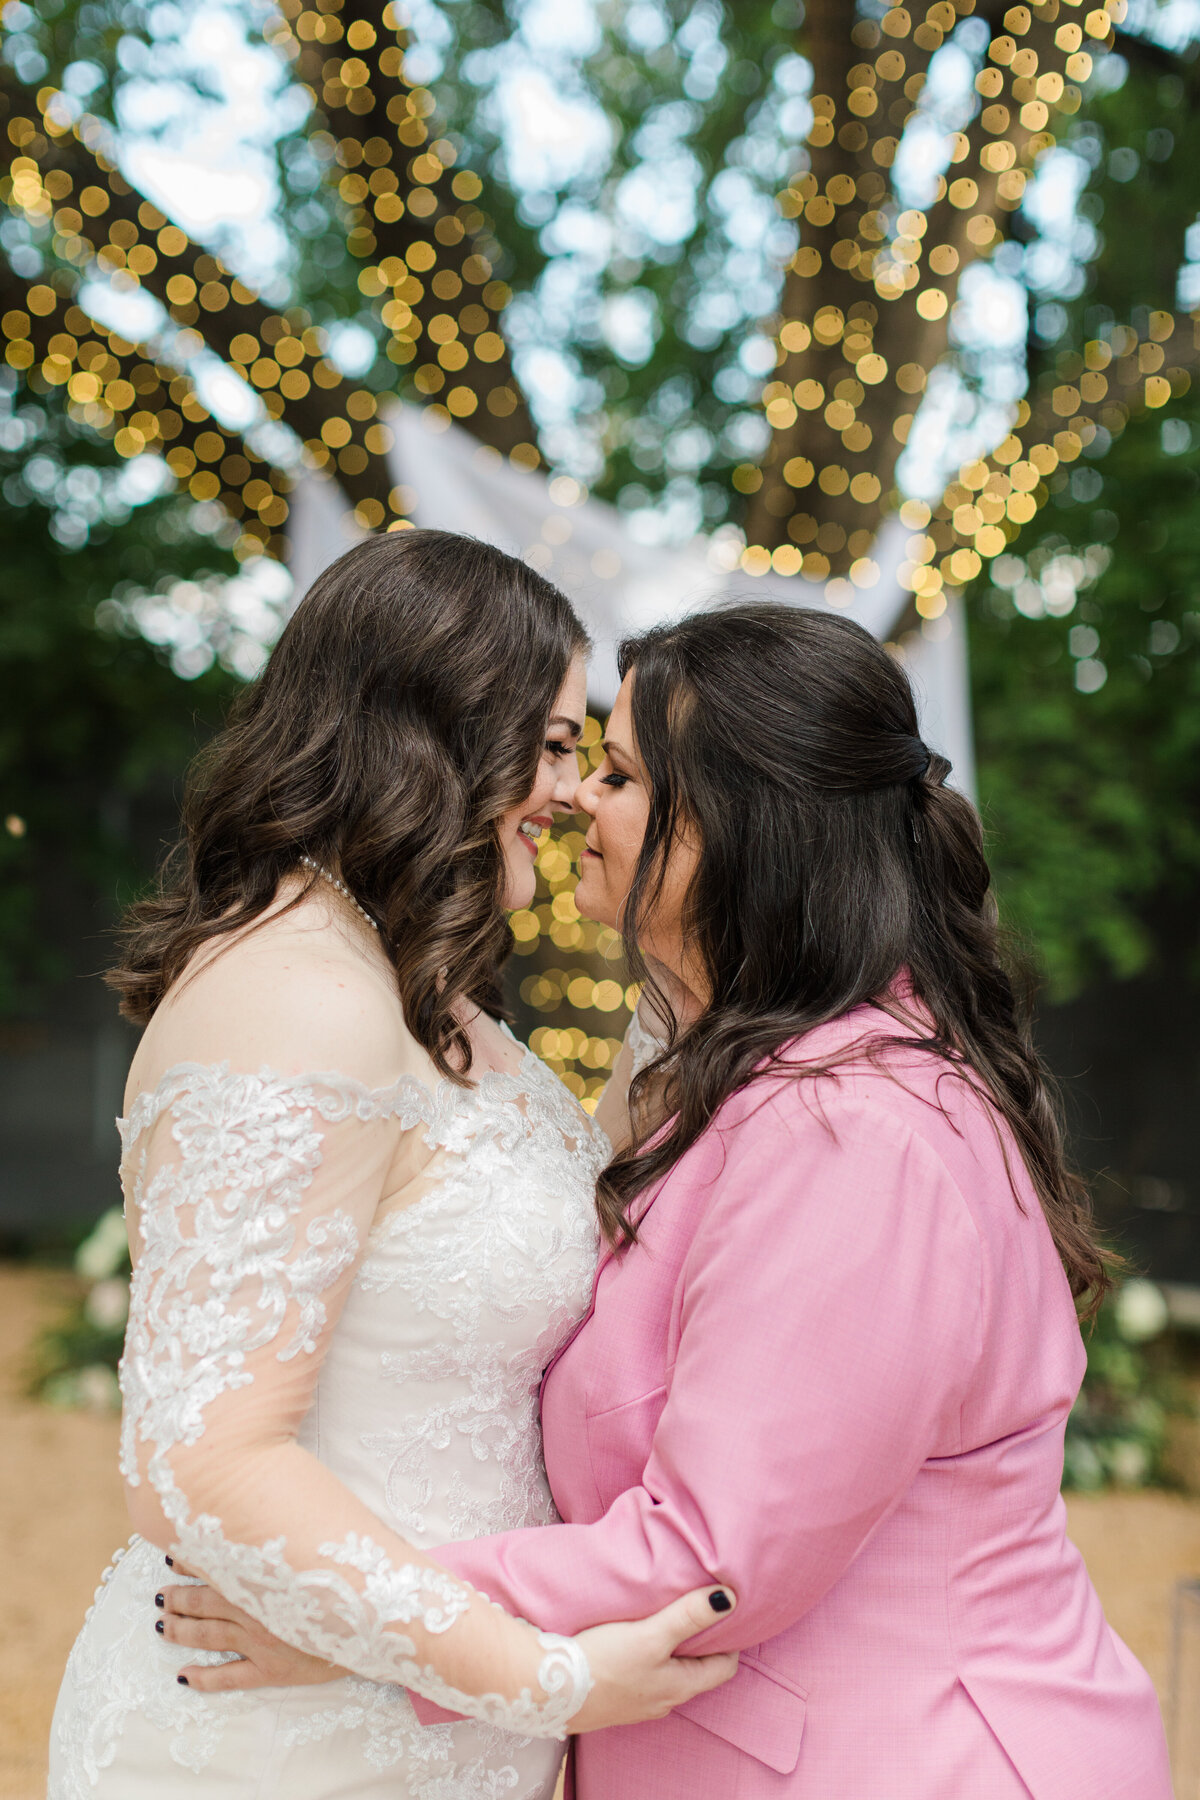 Portrait of two brides holding each other close and coming in for a kiss on their wedding day at Artspace111 in Fort Worth, Texas. The bride on the left is wearing a long sleeve, intricate, white dress while the bride on the right is wearing a pink suit. A large tree covered in lights towers above them in the background.